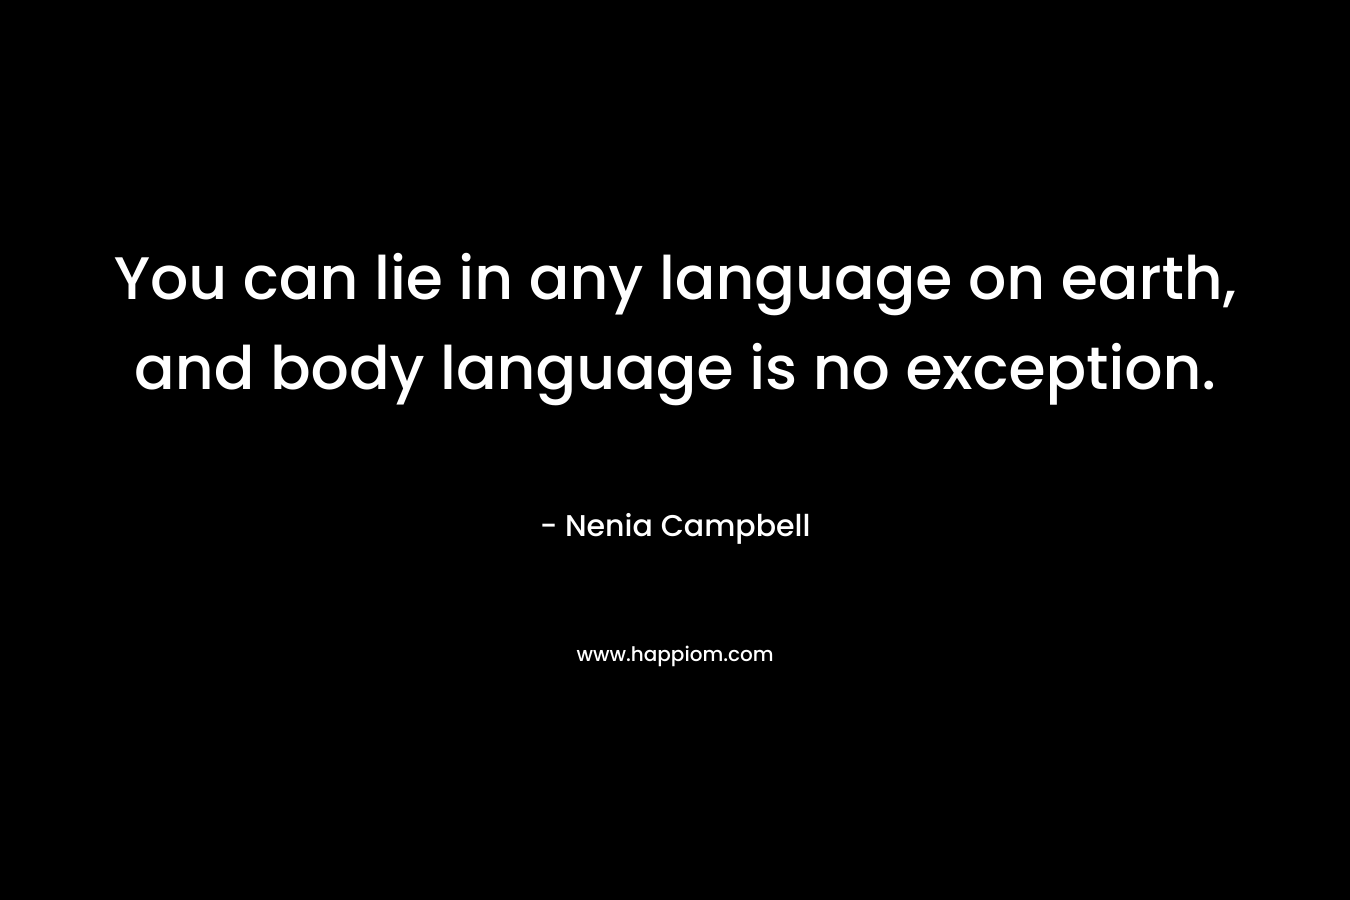 You can lie in any language on earth, and body language is no exception.